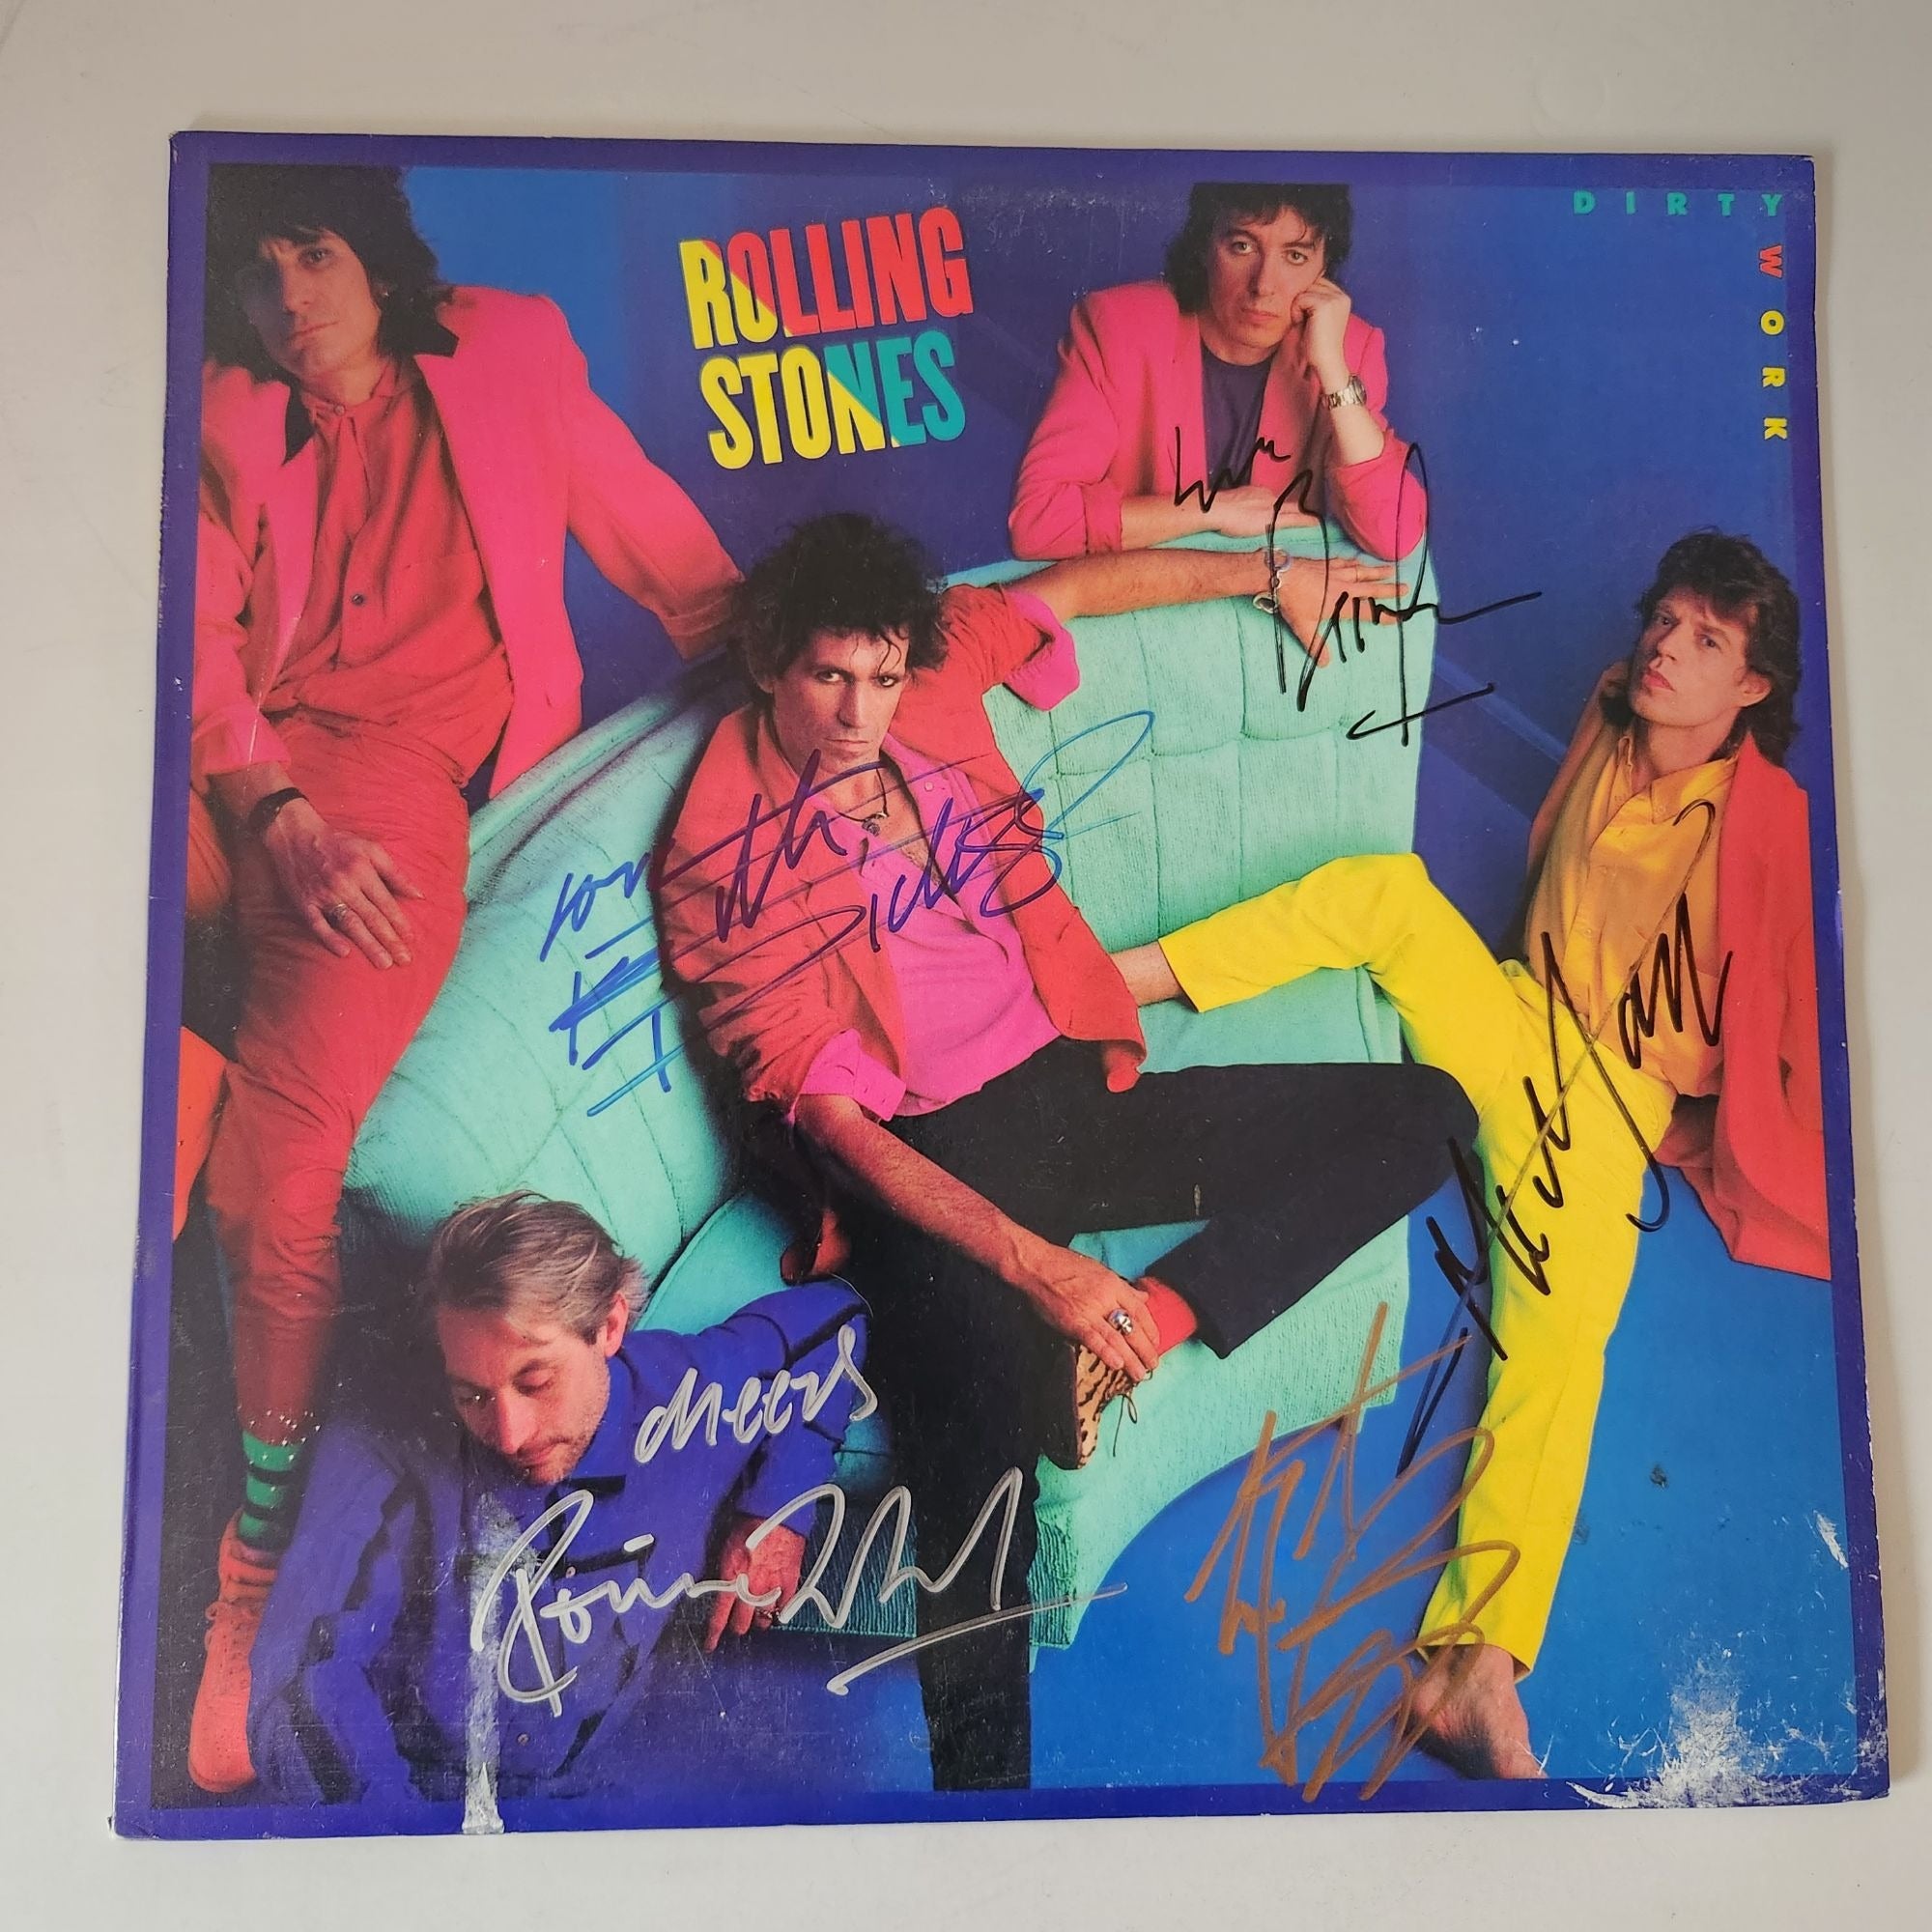 The Rolling Stones Dirty Work LP Bill Wyman Mick Jagger Keith Richards Ronnie Wood Charlie Watts signed with proof